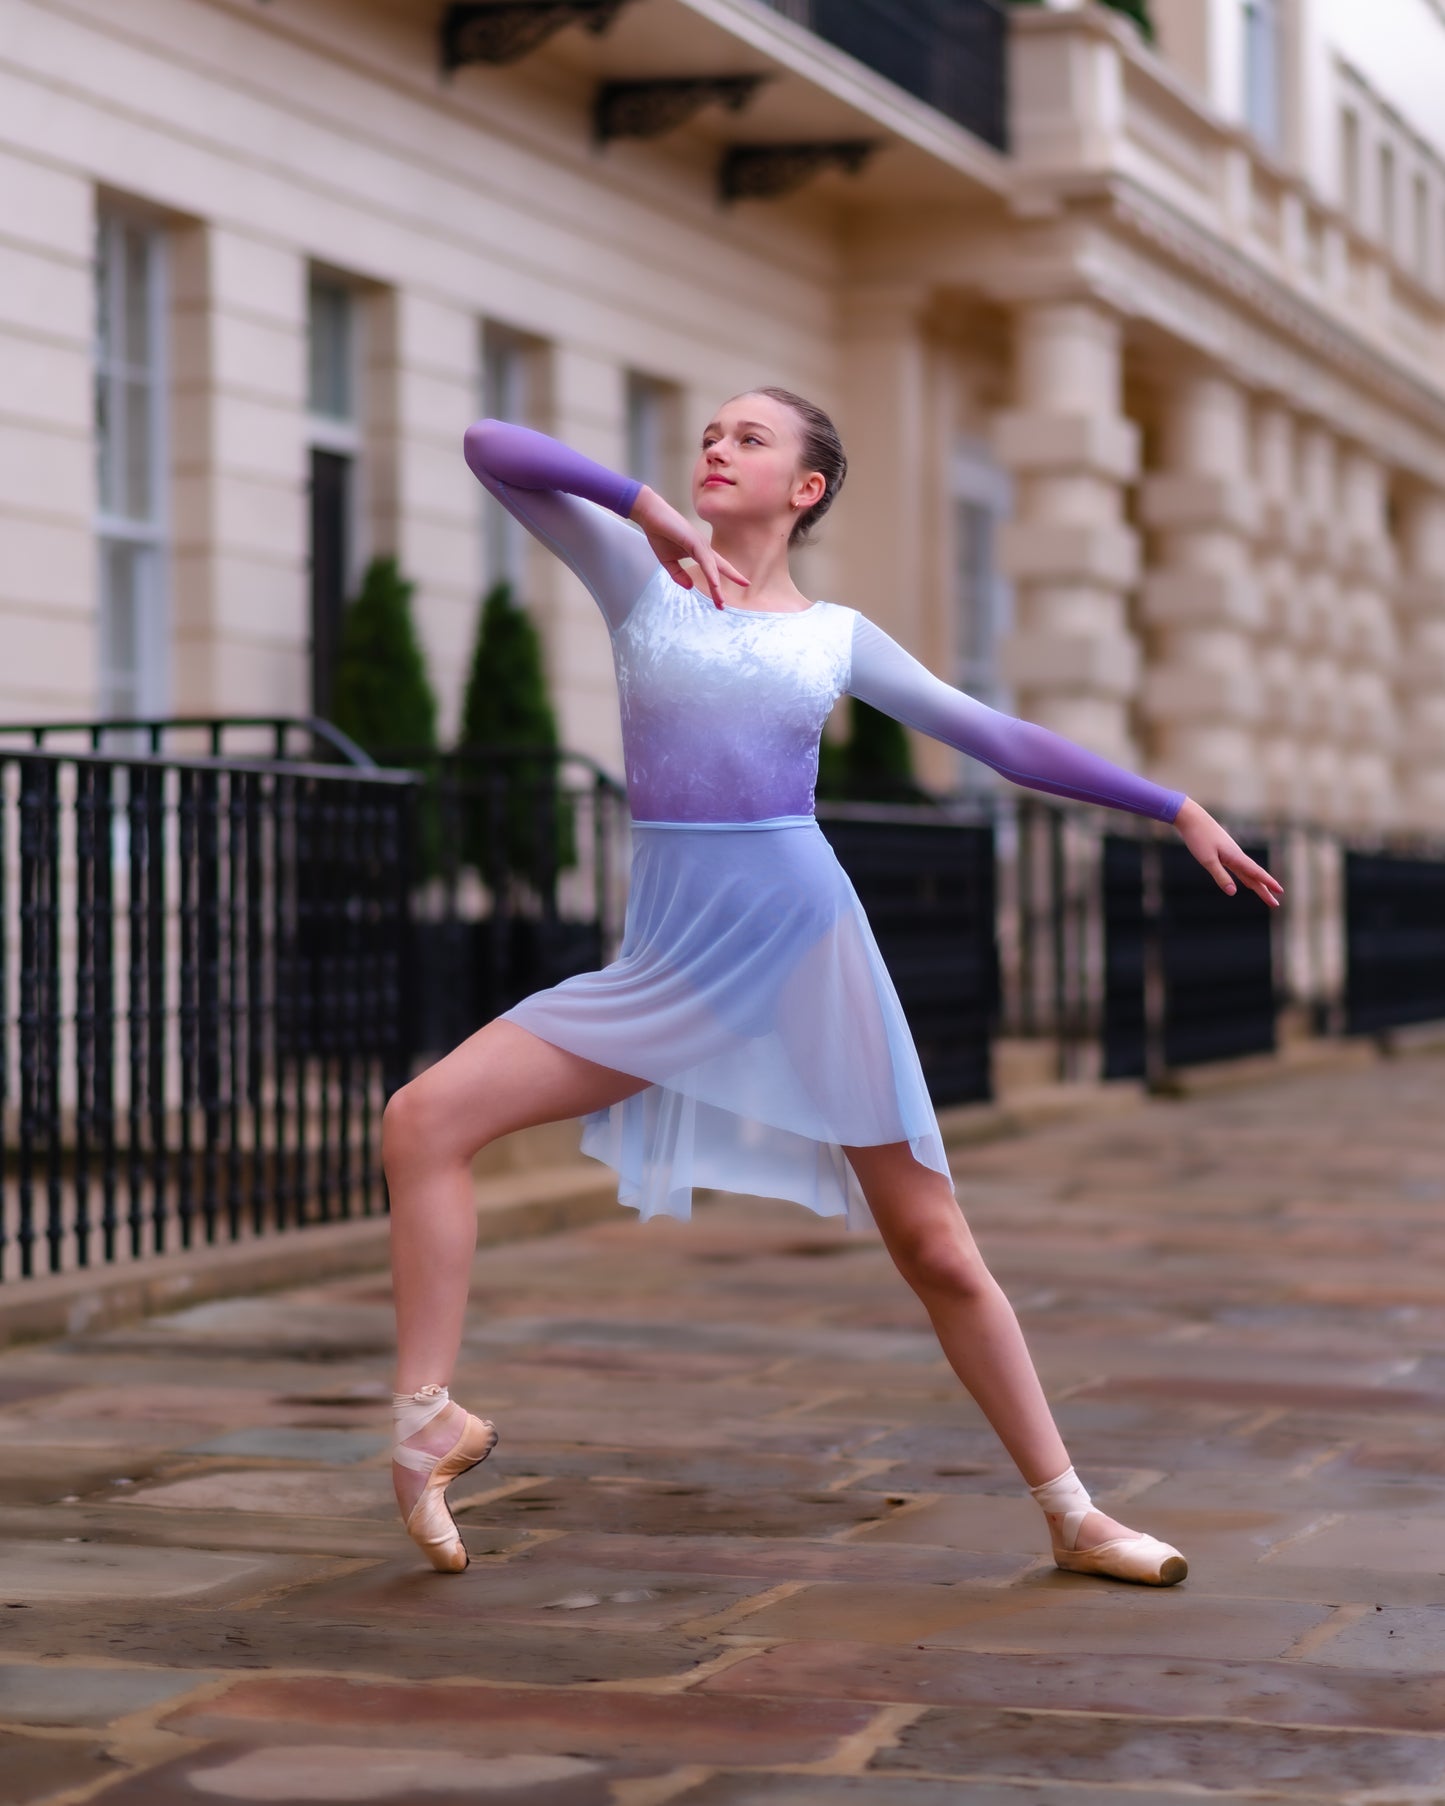 Ombre velour leotard duck Lilac / Ice blue from The Collective Dancewear photo: Jon Raffoul